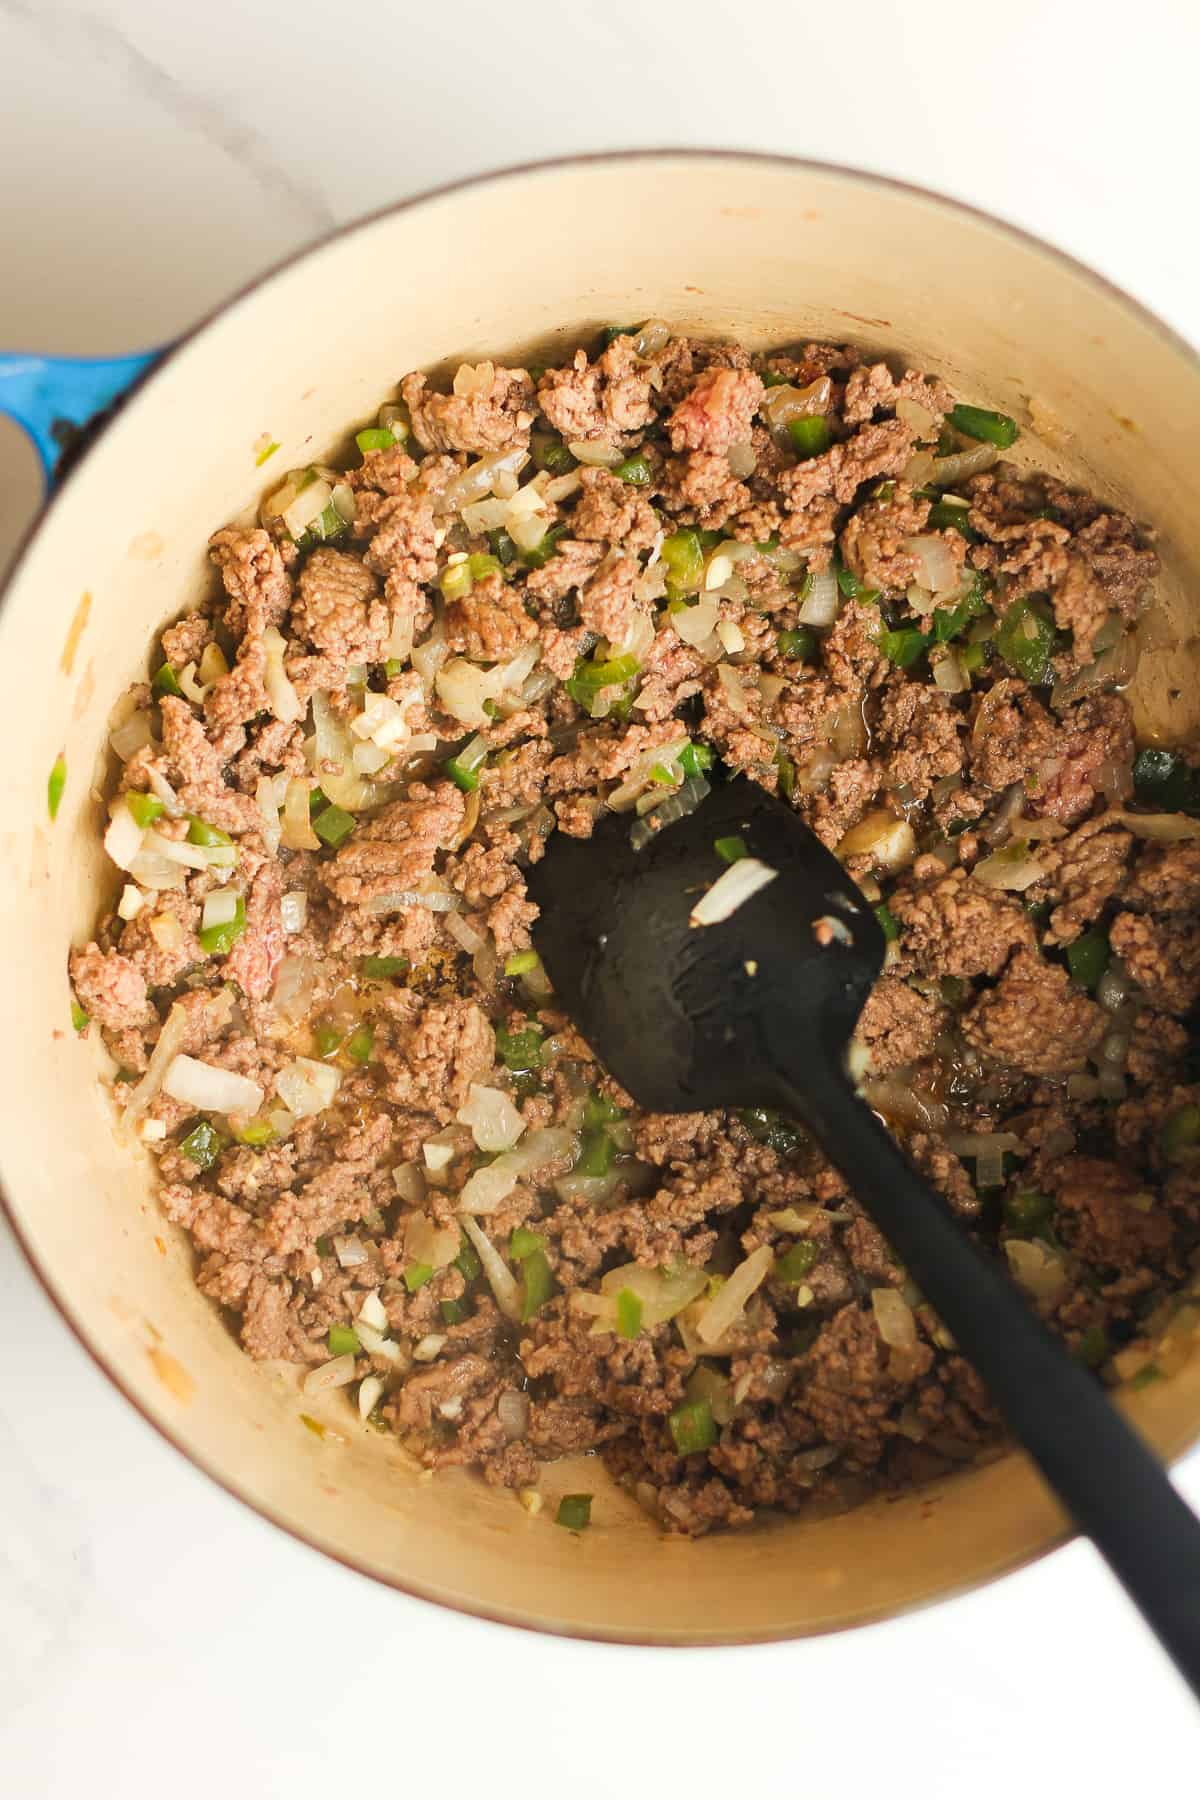 A pot of the ground beef and veggies.